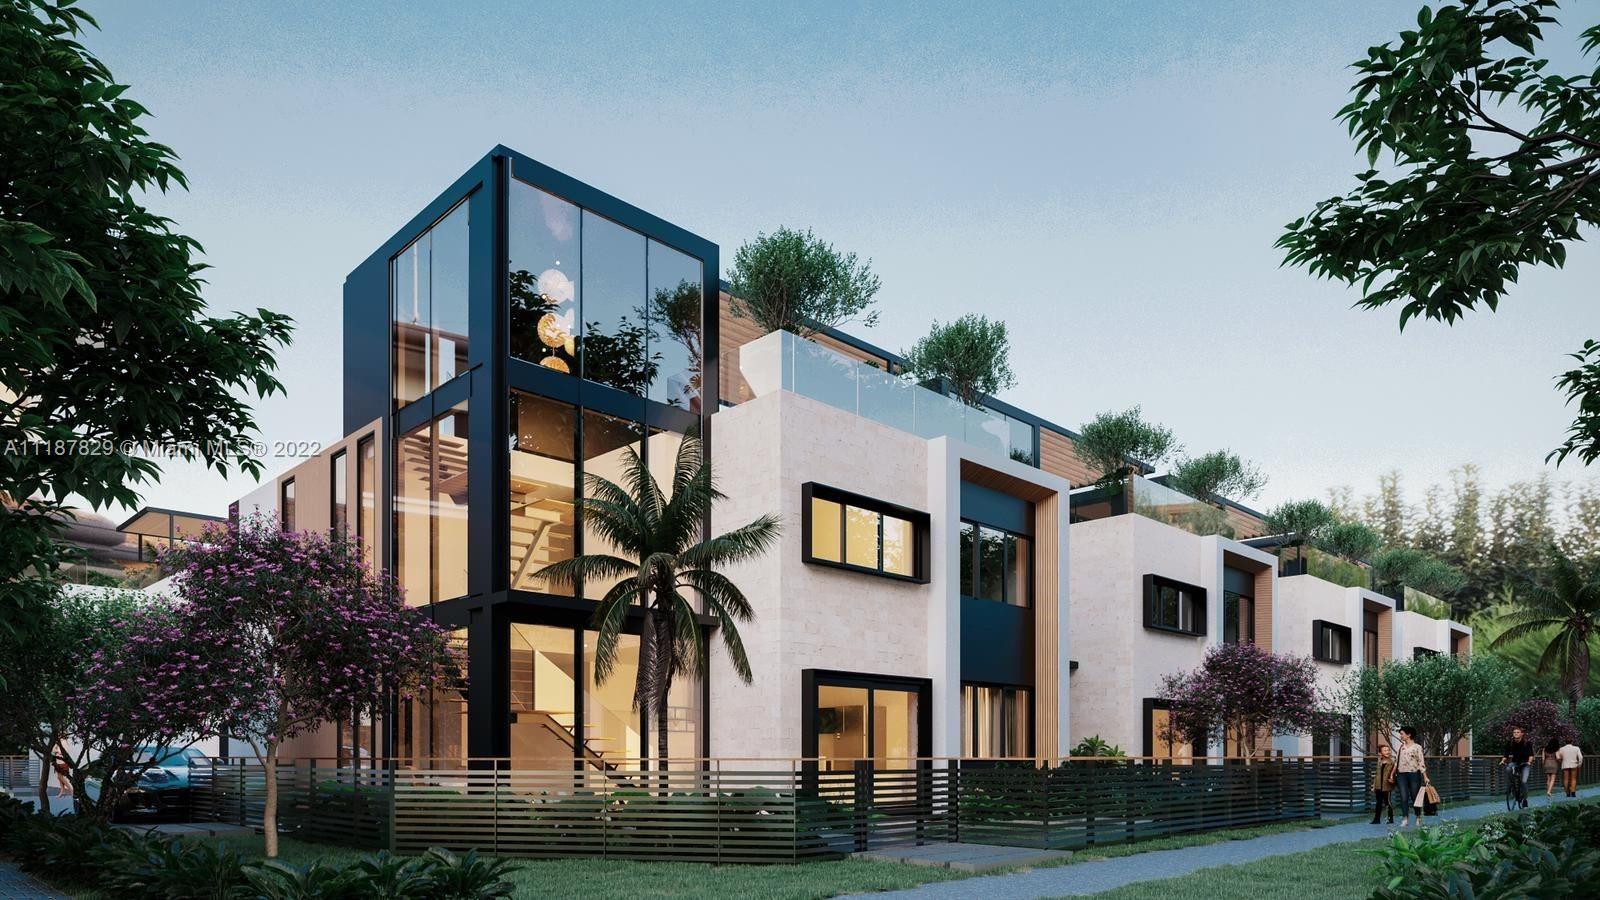 Amazing, modern architecture, brand new construction, luxury townhouse (the entire complex will have a total of 8 units with 3-4 bedrooms) is estimated to be completed by November 2023.  Apprx 4300 sq. ft. total area, 4140 living area which includes the 1100 sq. ft. private, panoramic sun deck. Apprx. 2500 AC area. Sub-Zero, Miele, Wolf, appliances and polished concrete floors and private pool all included. 400 sq ft 2 car garage. Architectural renderings available. Established developer estimates completion around November 2023.  Ground breaking already begun.  10% down at contract (and 20% additional at shell completion) Special investor discount for cash in advance. 
We offer an optional "no documentation" mortgage with 10% down, w/no MI, for qualified buyers.